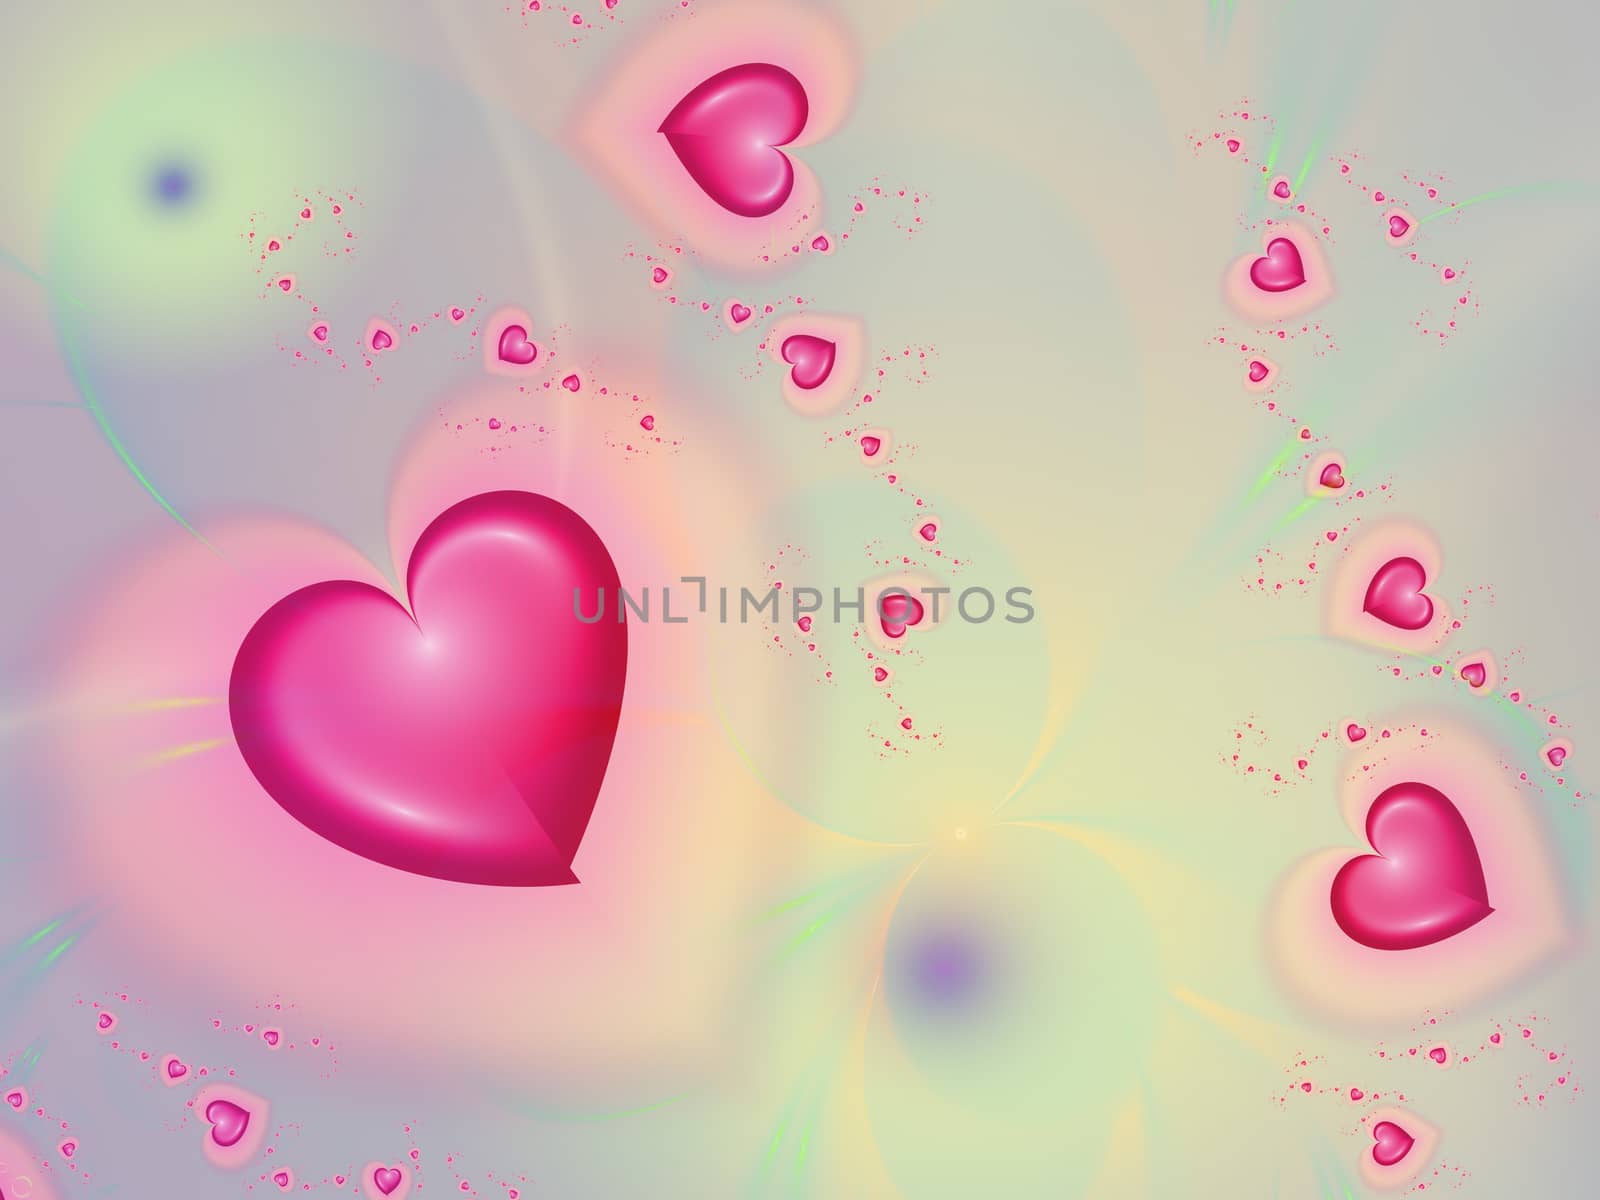 beautiful background with hearts